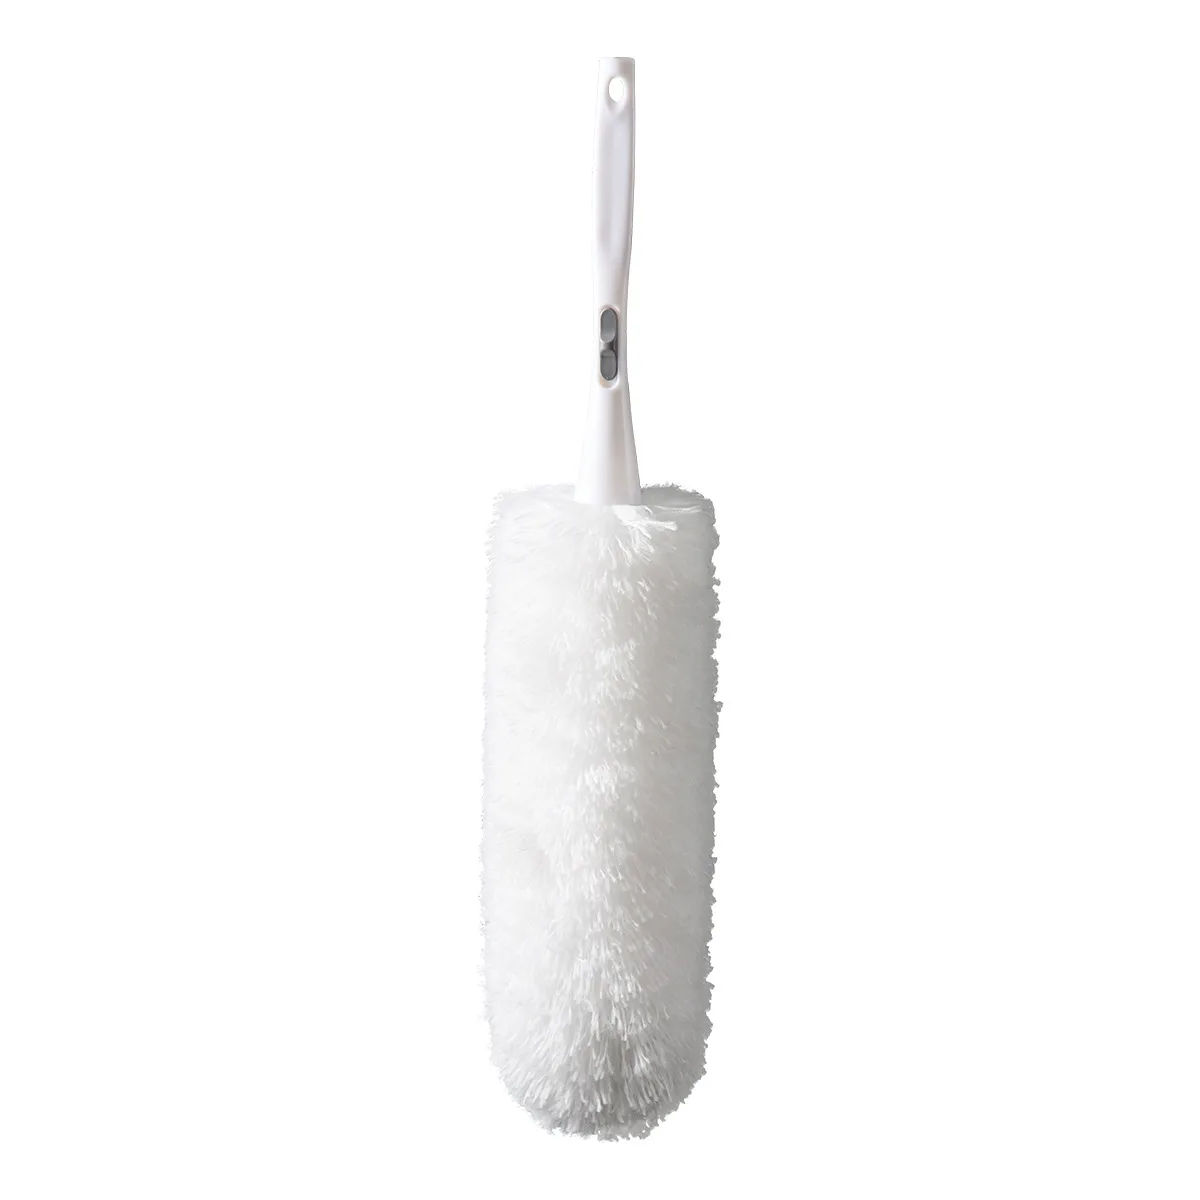 

A2307 Home Room Detachable Handle Dusters Cleaning Dust Car Clean Feather Duster, White